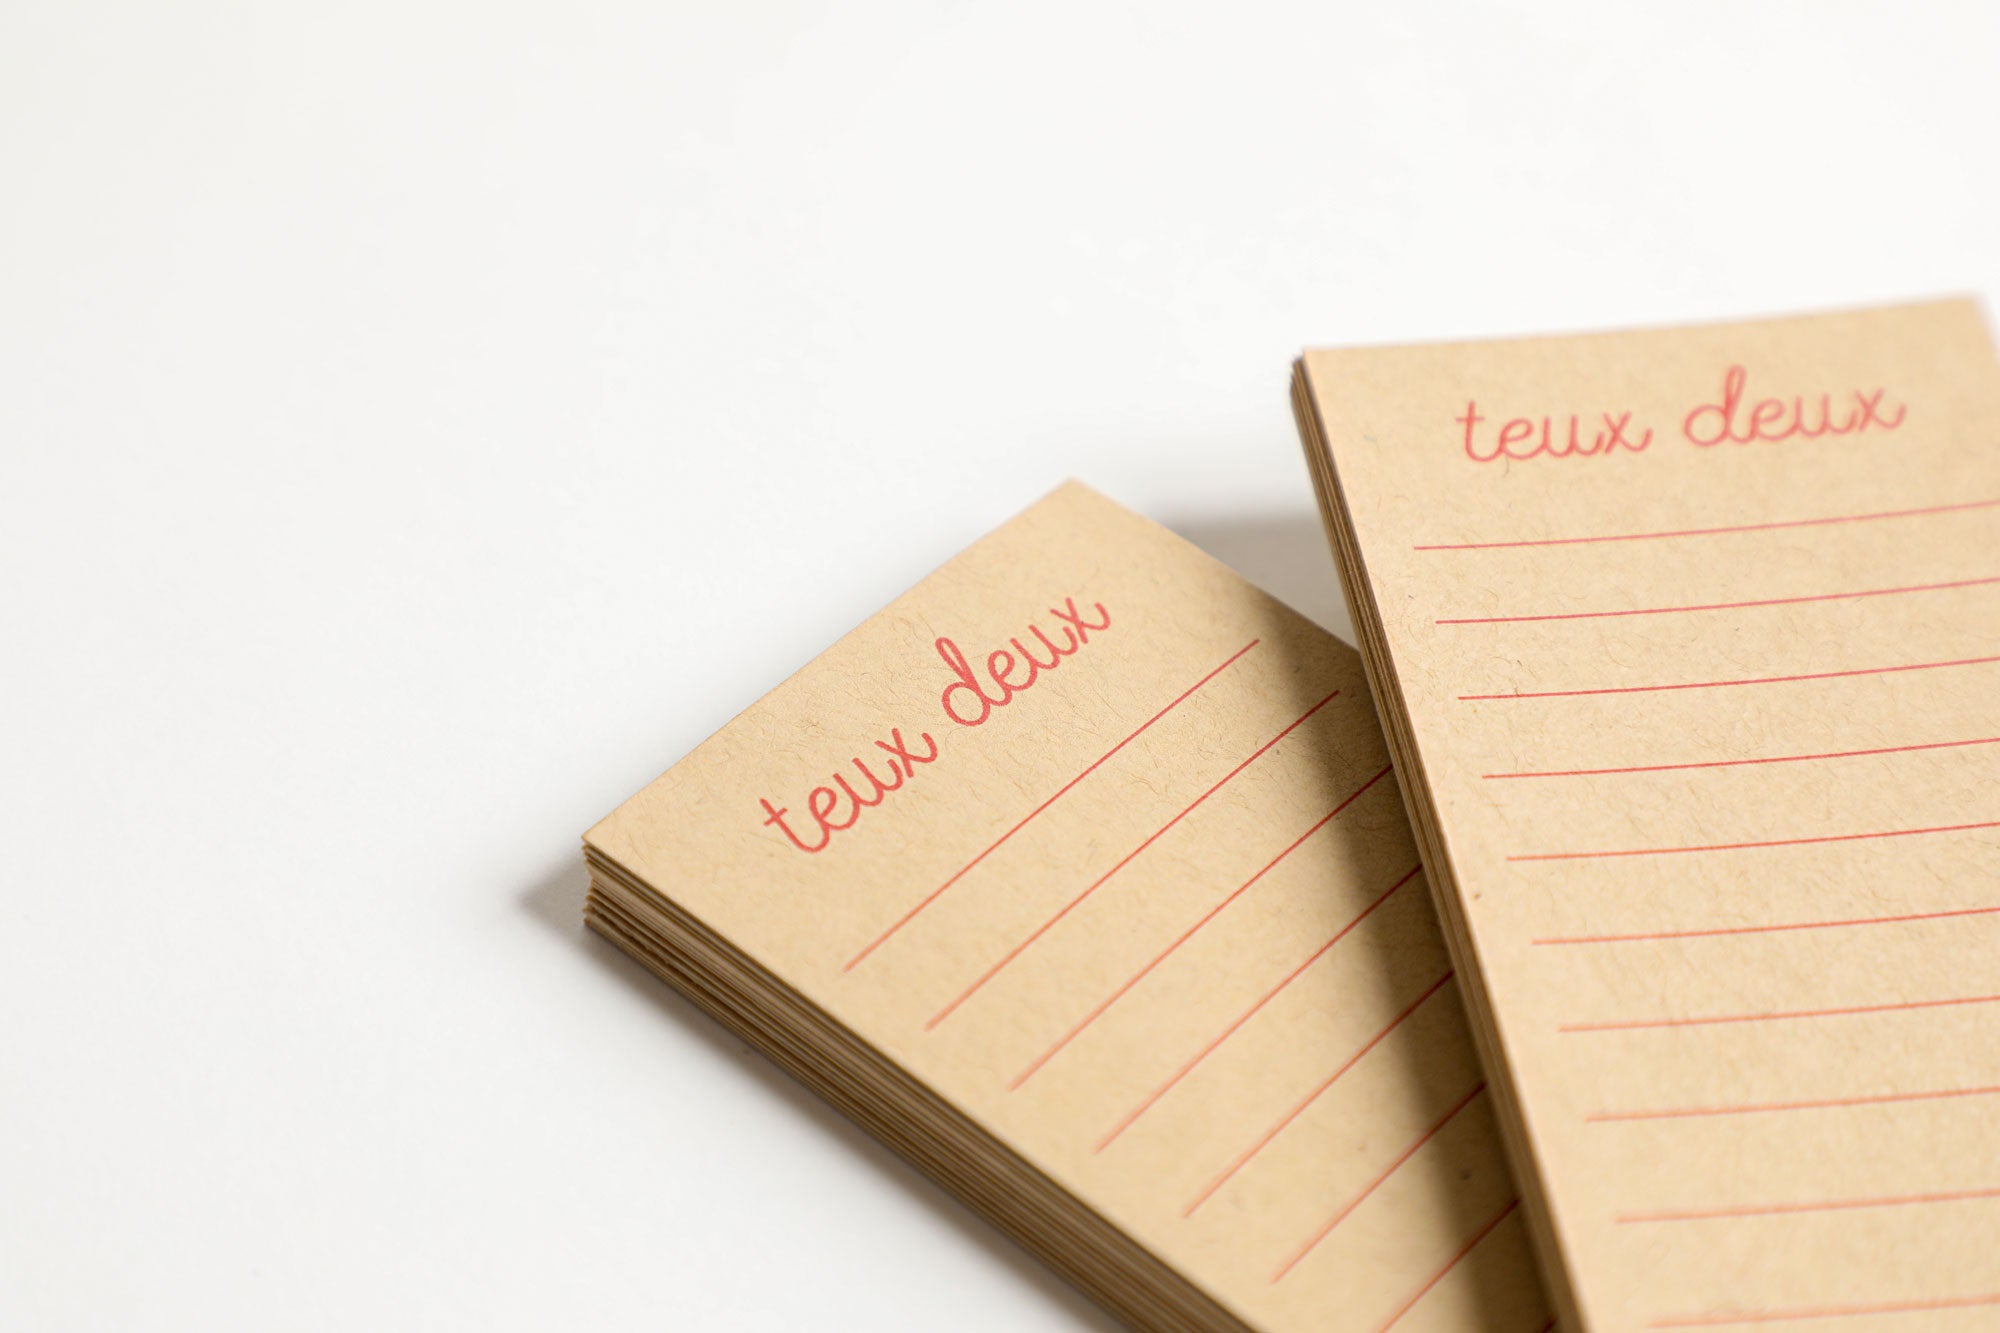 Teux Deux - Zero Waste Notepad - Gives to Feed the Second Line